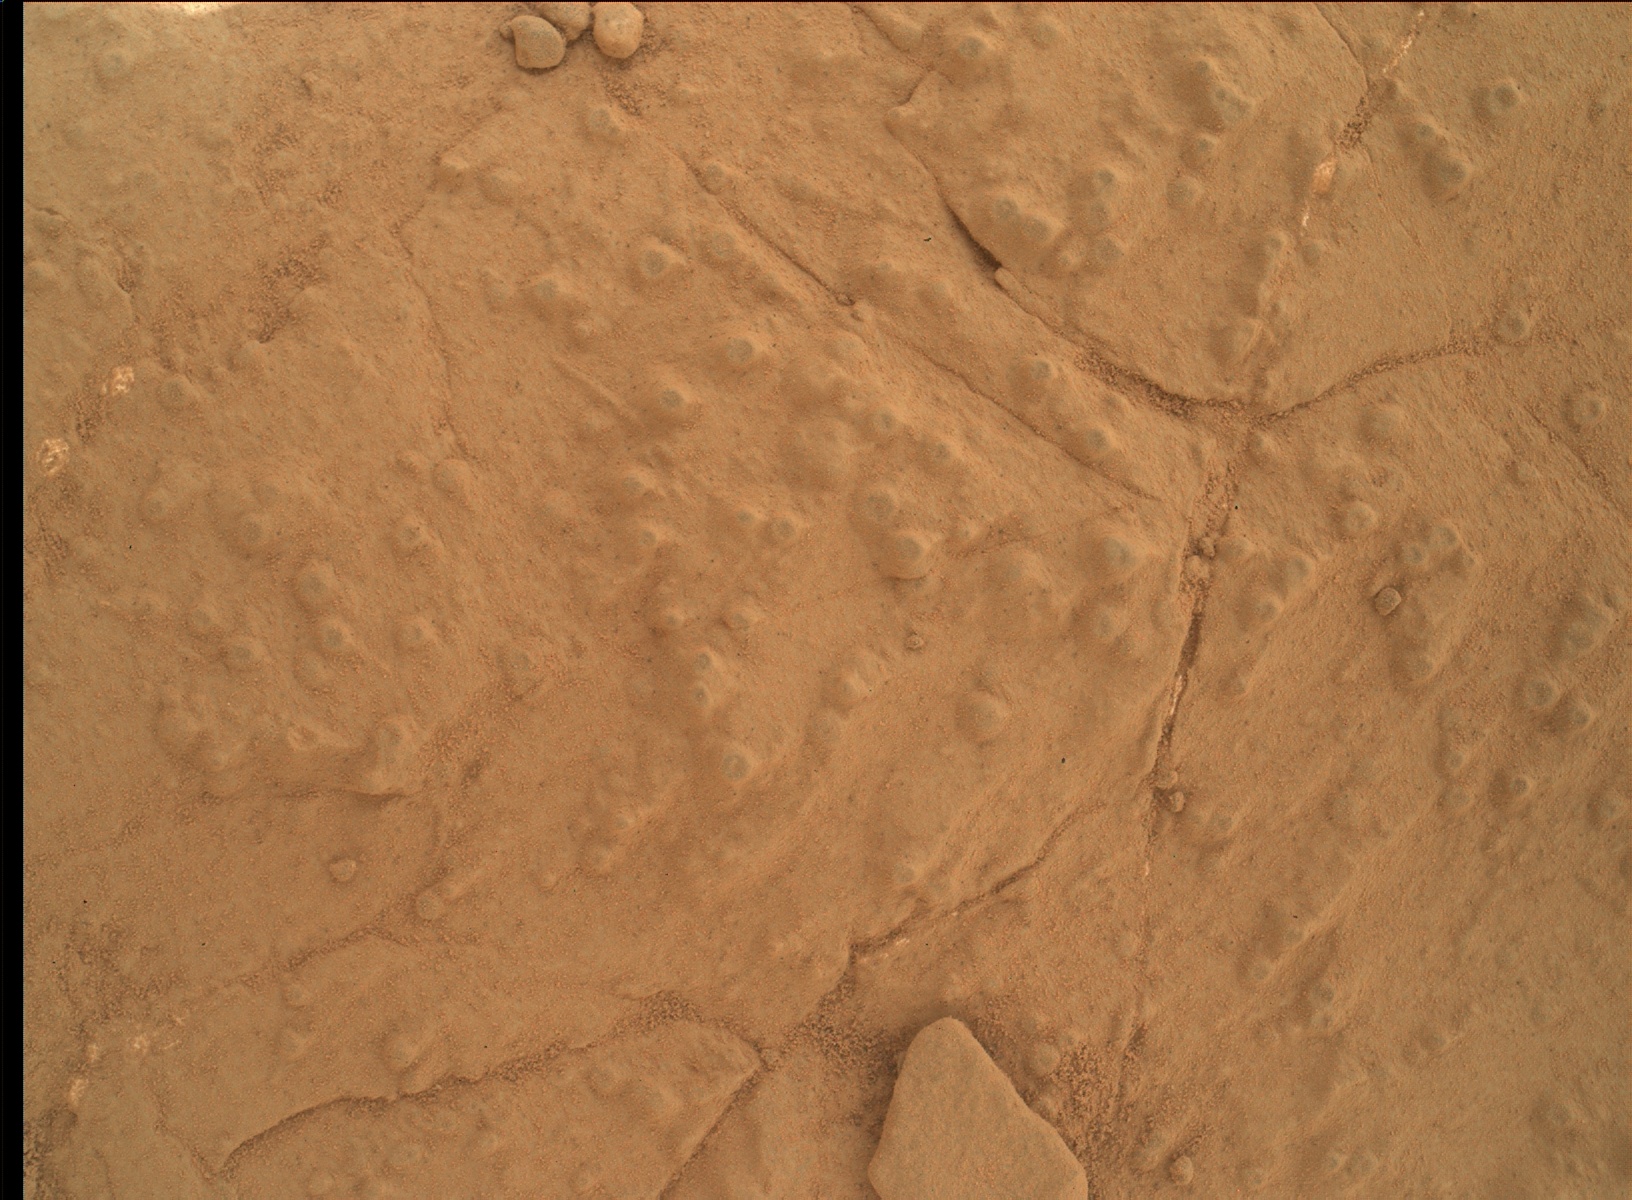 Nasa's Mars rover Curiosity acquired this image using its Mars Hand Lens Imager (MAHLI) on Sol 275